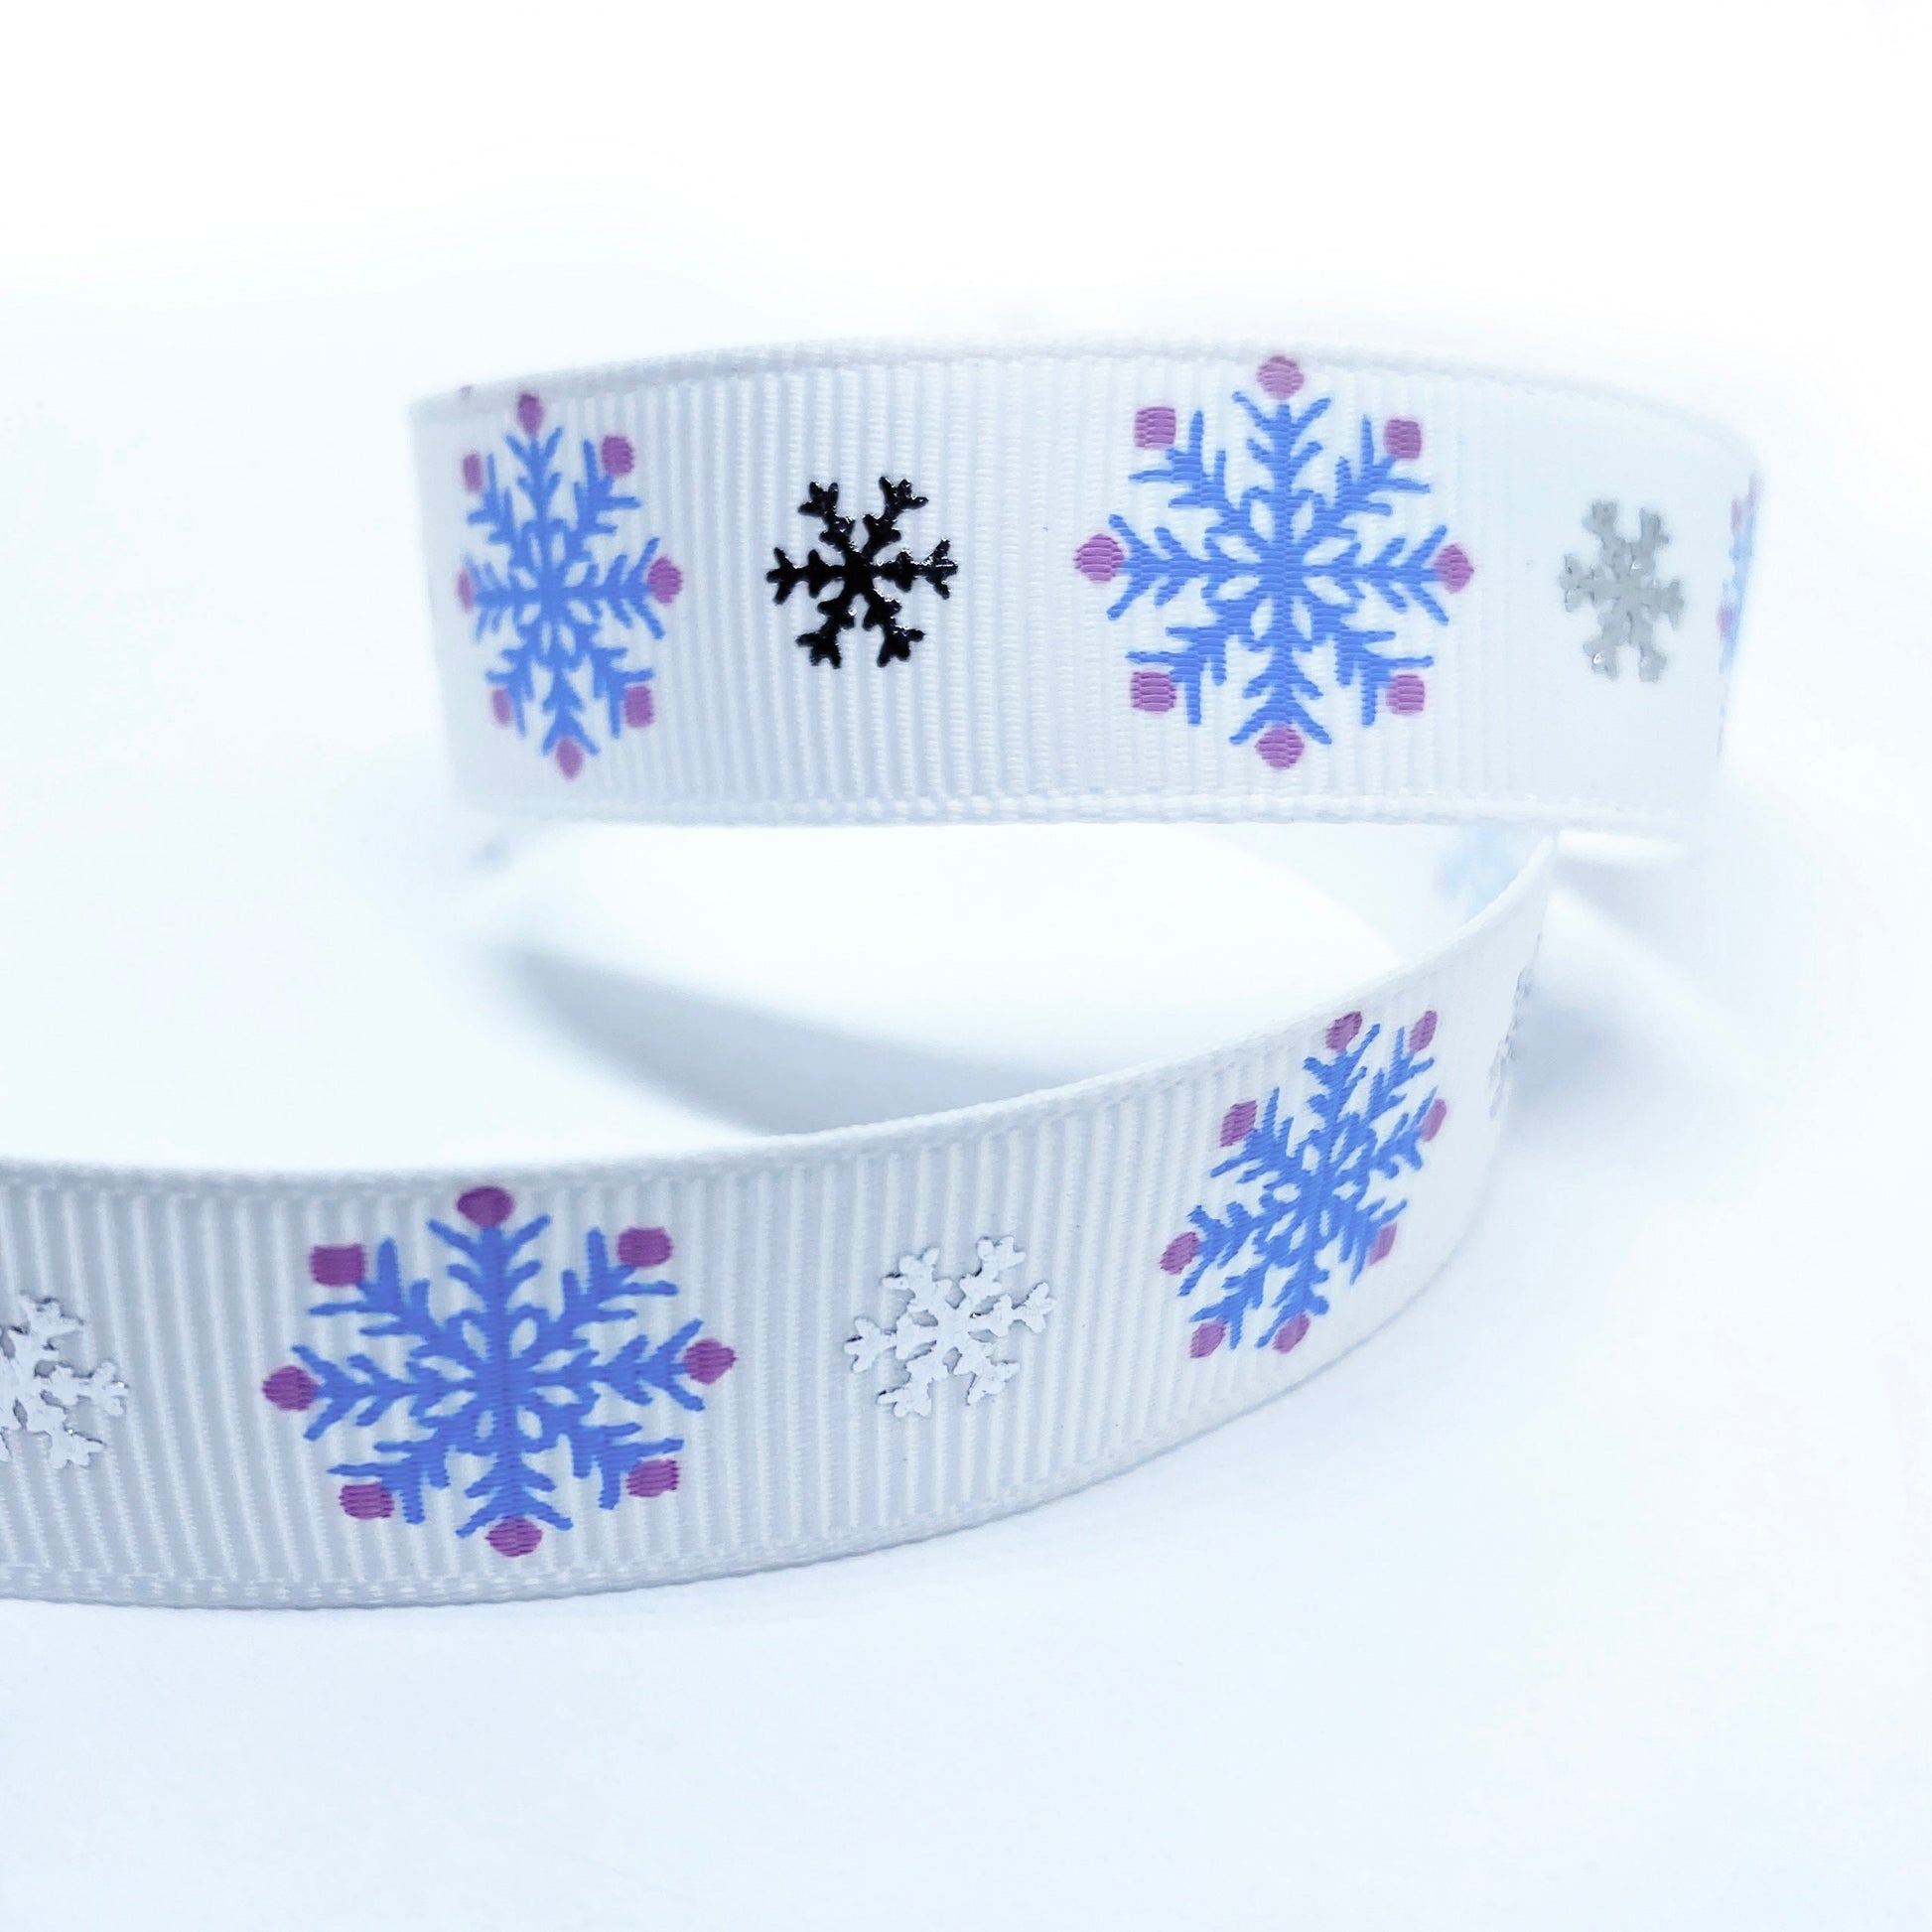 Snowflake Grosgrain Ribbon Blue or White Silver Metallic 16mm or 22m | Wrapping - SweetpeaStore